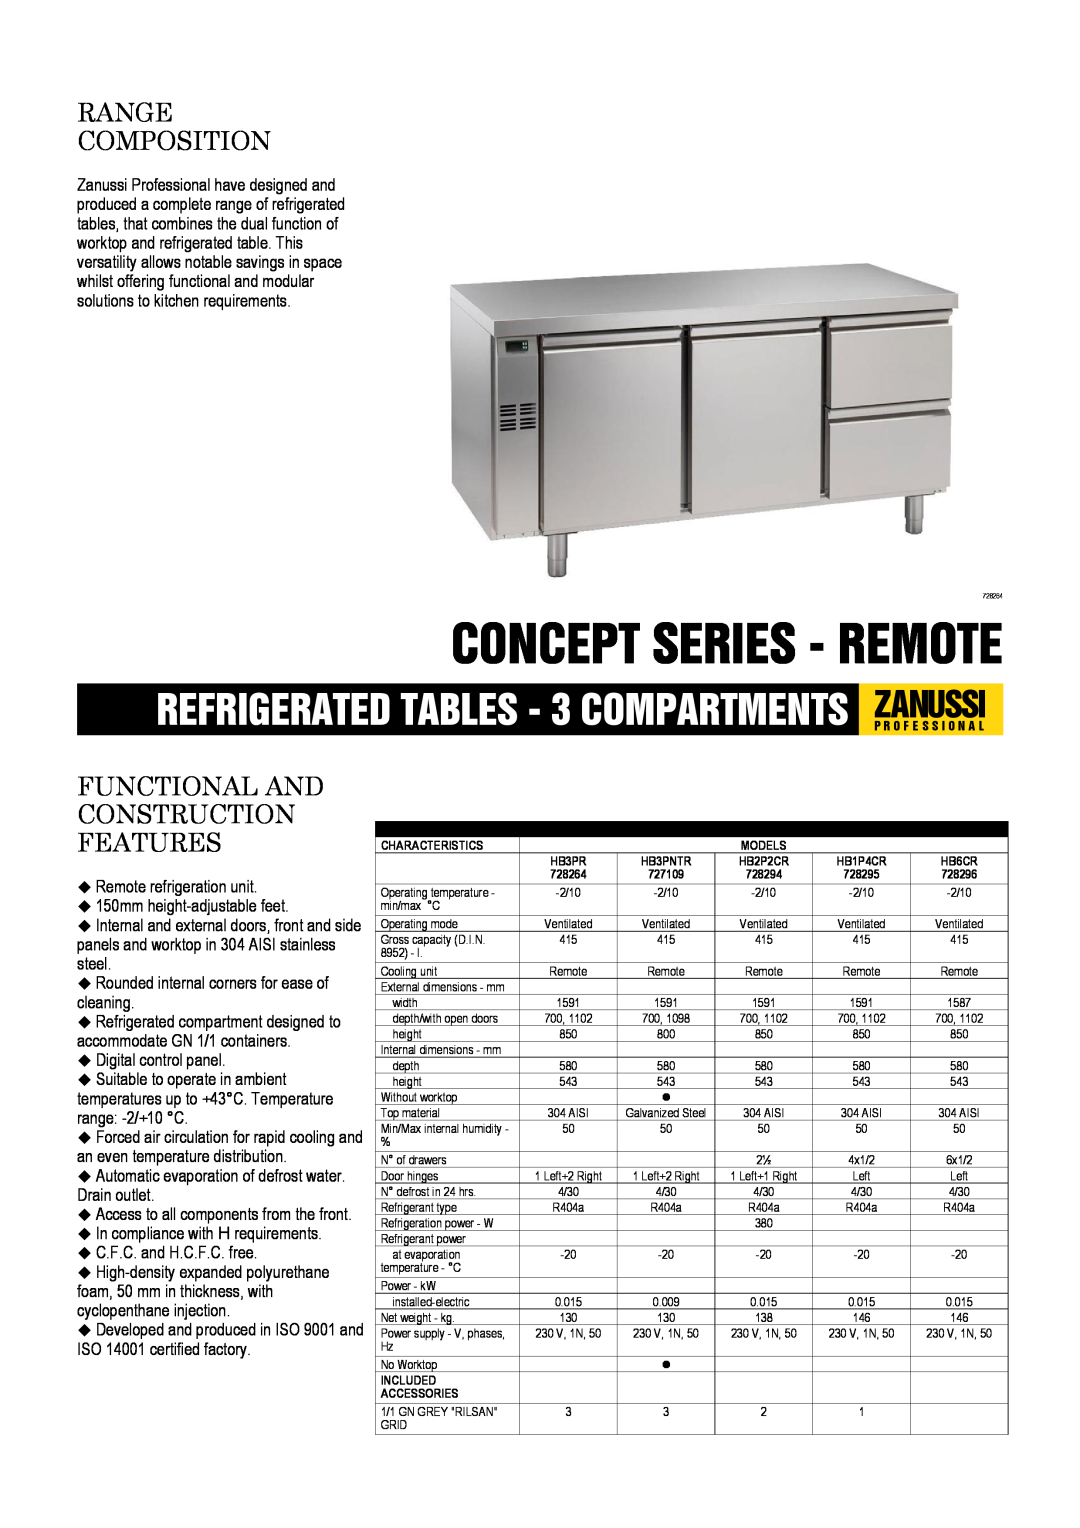 Zanussi 728295, 728296, 728294 dimensions Concept Series - Remote, Range Composition, Functional And Construction Features 